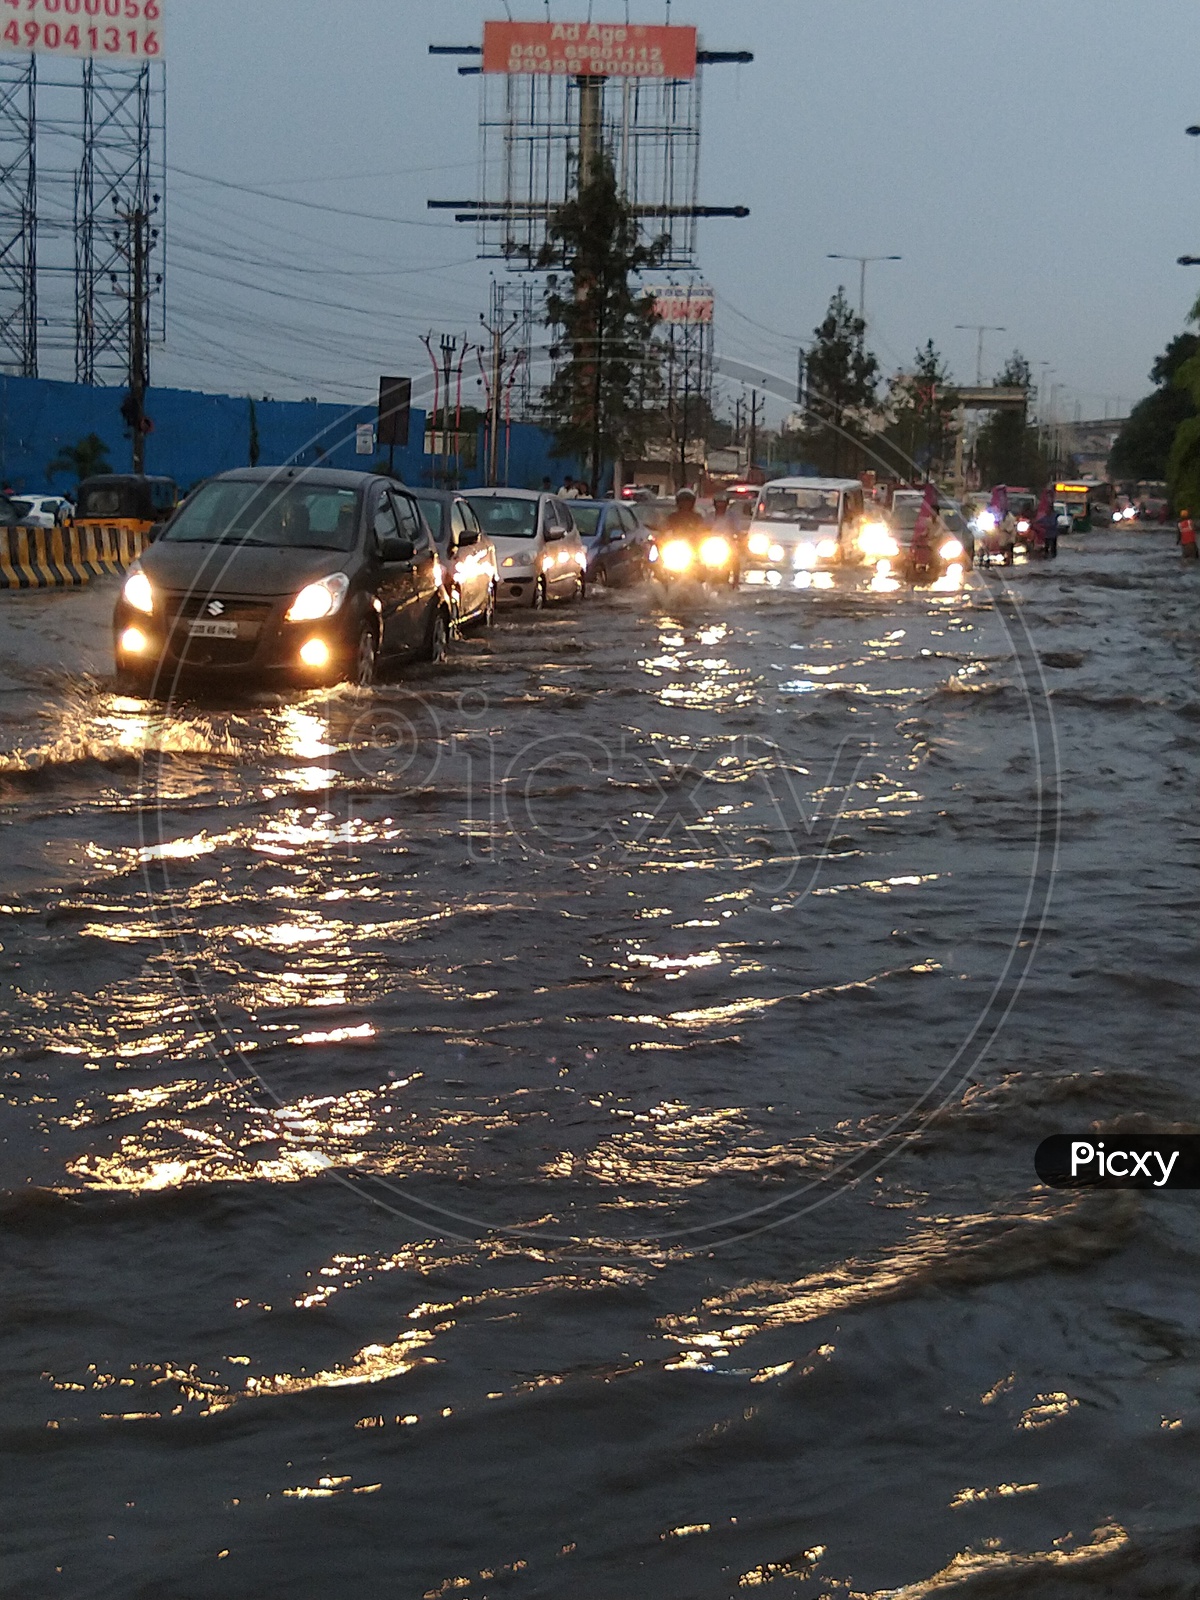 Hyderabad Commuters struggling on Flooded Road